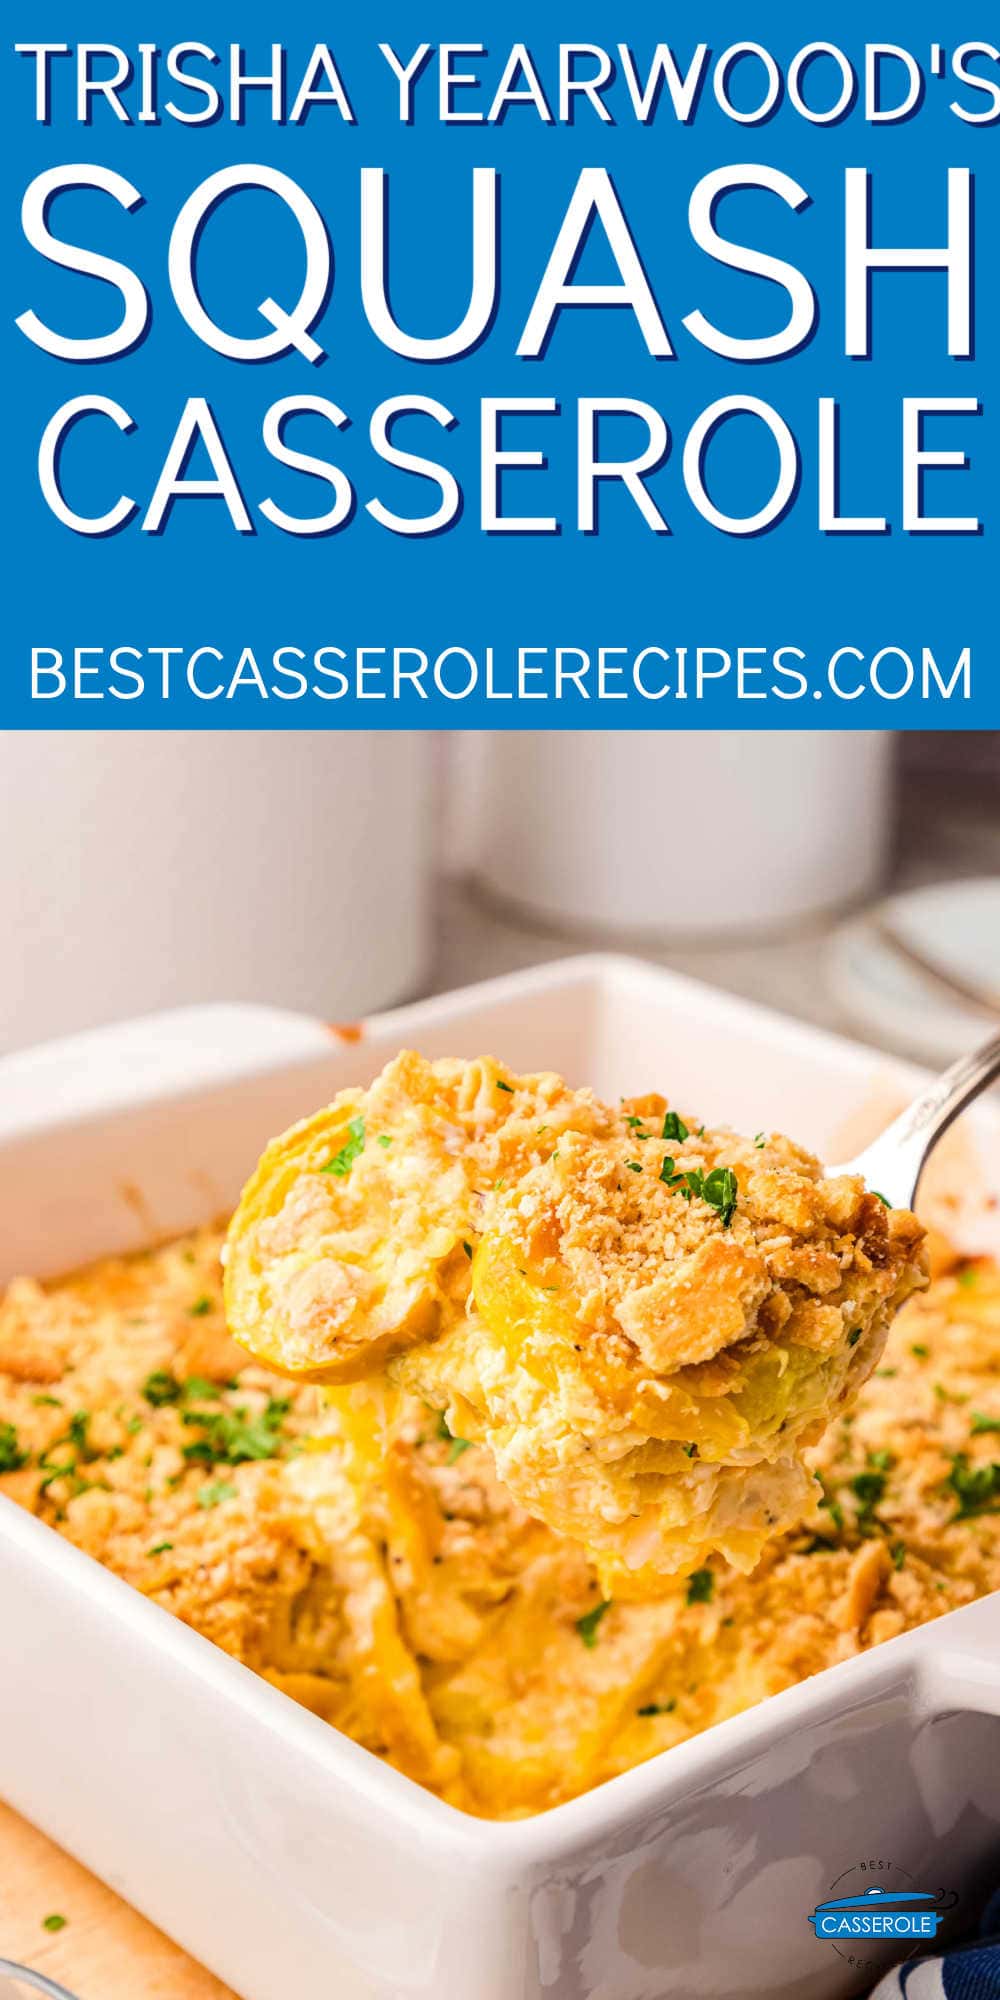 scoop of squash casserole with blue banner and white text